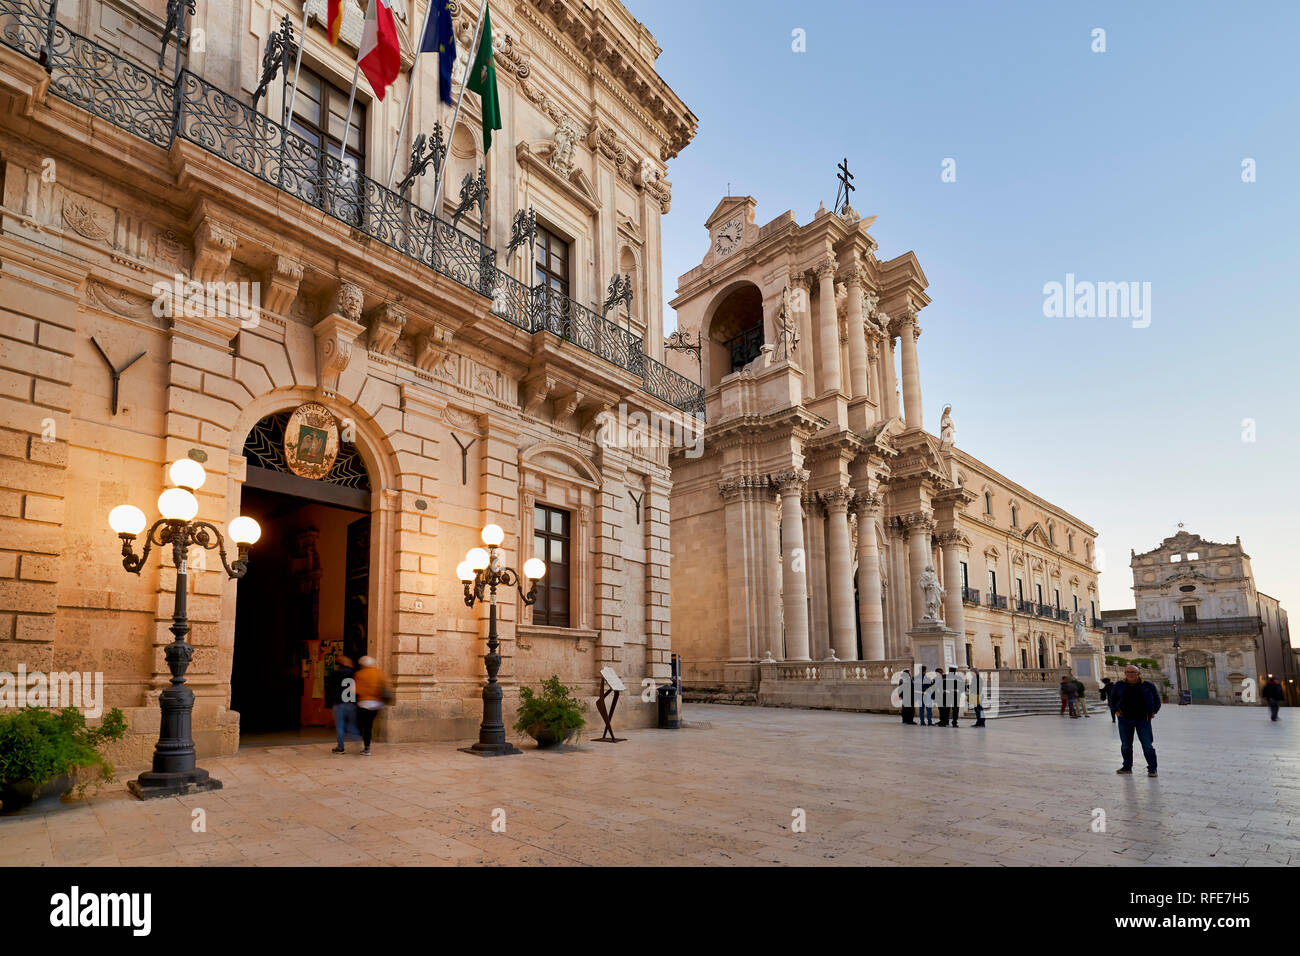 The Town Hall of Syracuse Ortygia. in Piazza Duomo. Sicily, Italy Stock Photo